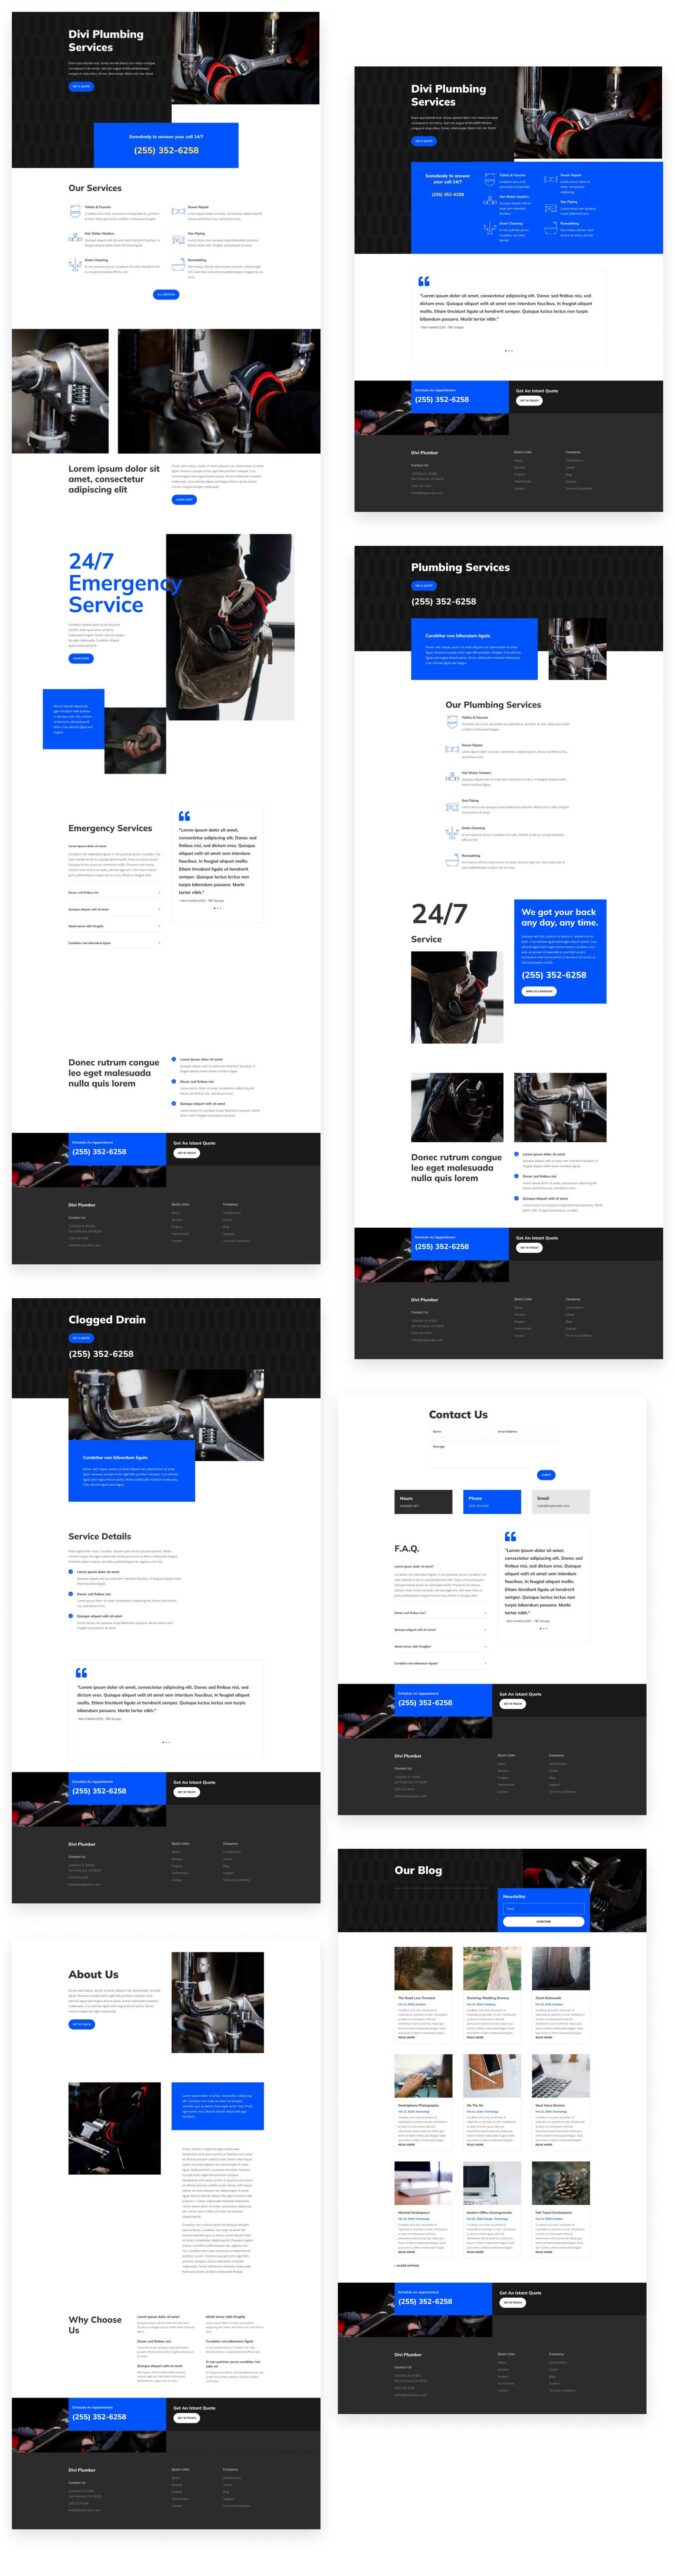 Plumbing layout pack for Divi